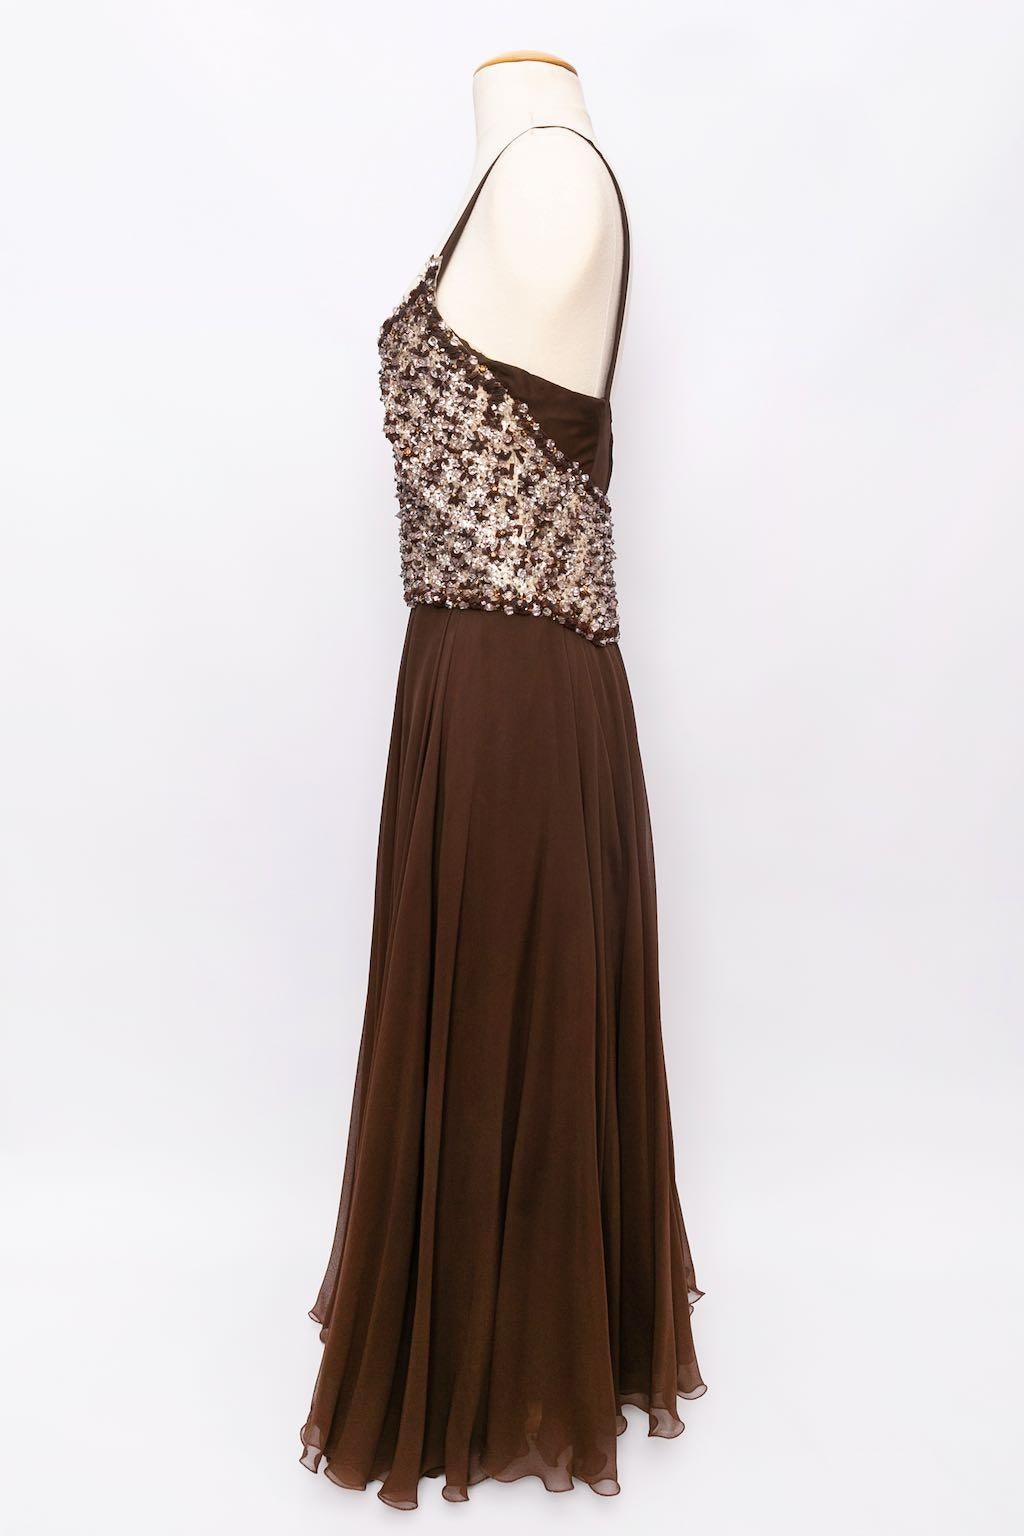 Pierre Balmain Haute Couture (N°132-027) Dress composed of silk chiffon, embroidered with beads and sequins. Back zip closure. 

Additional information: 
Dimensions: Bust: 36 cm (14.17